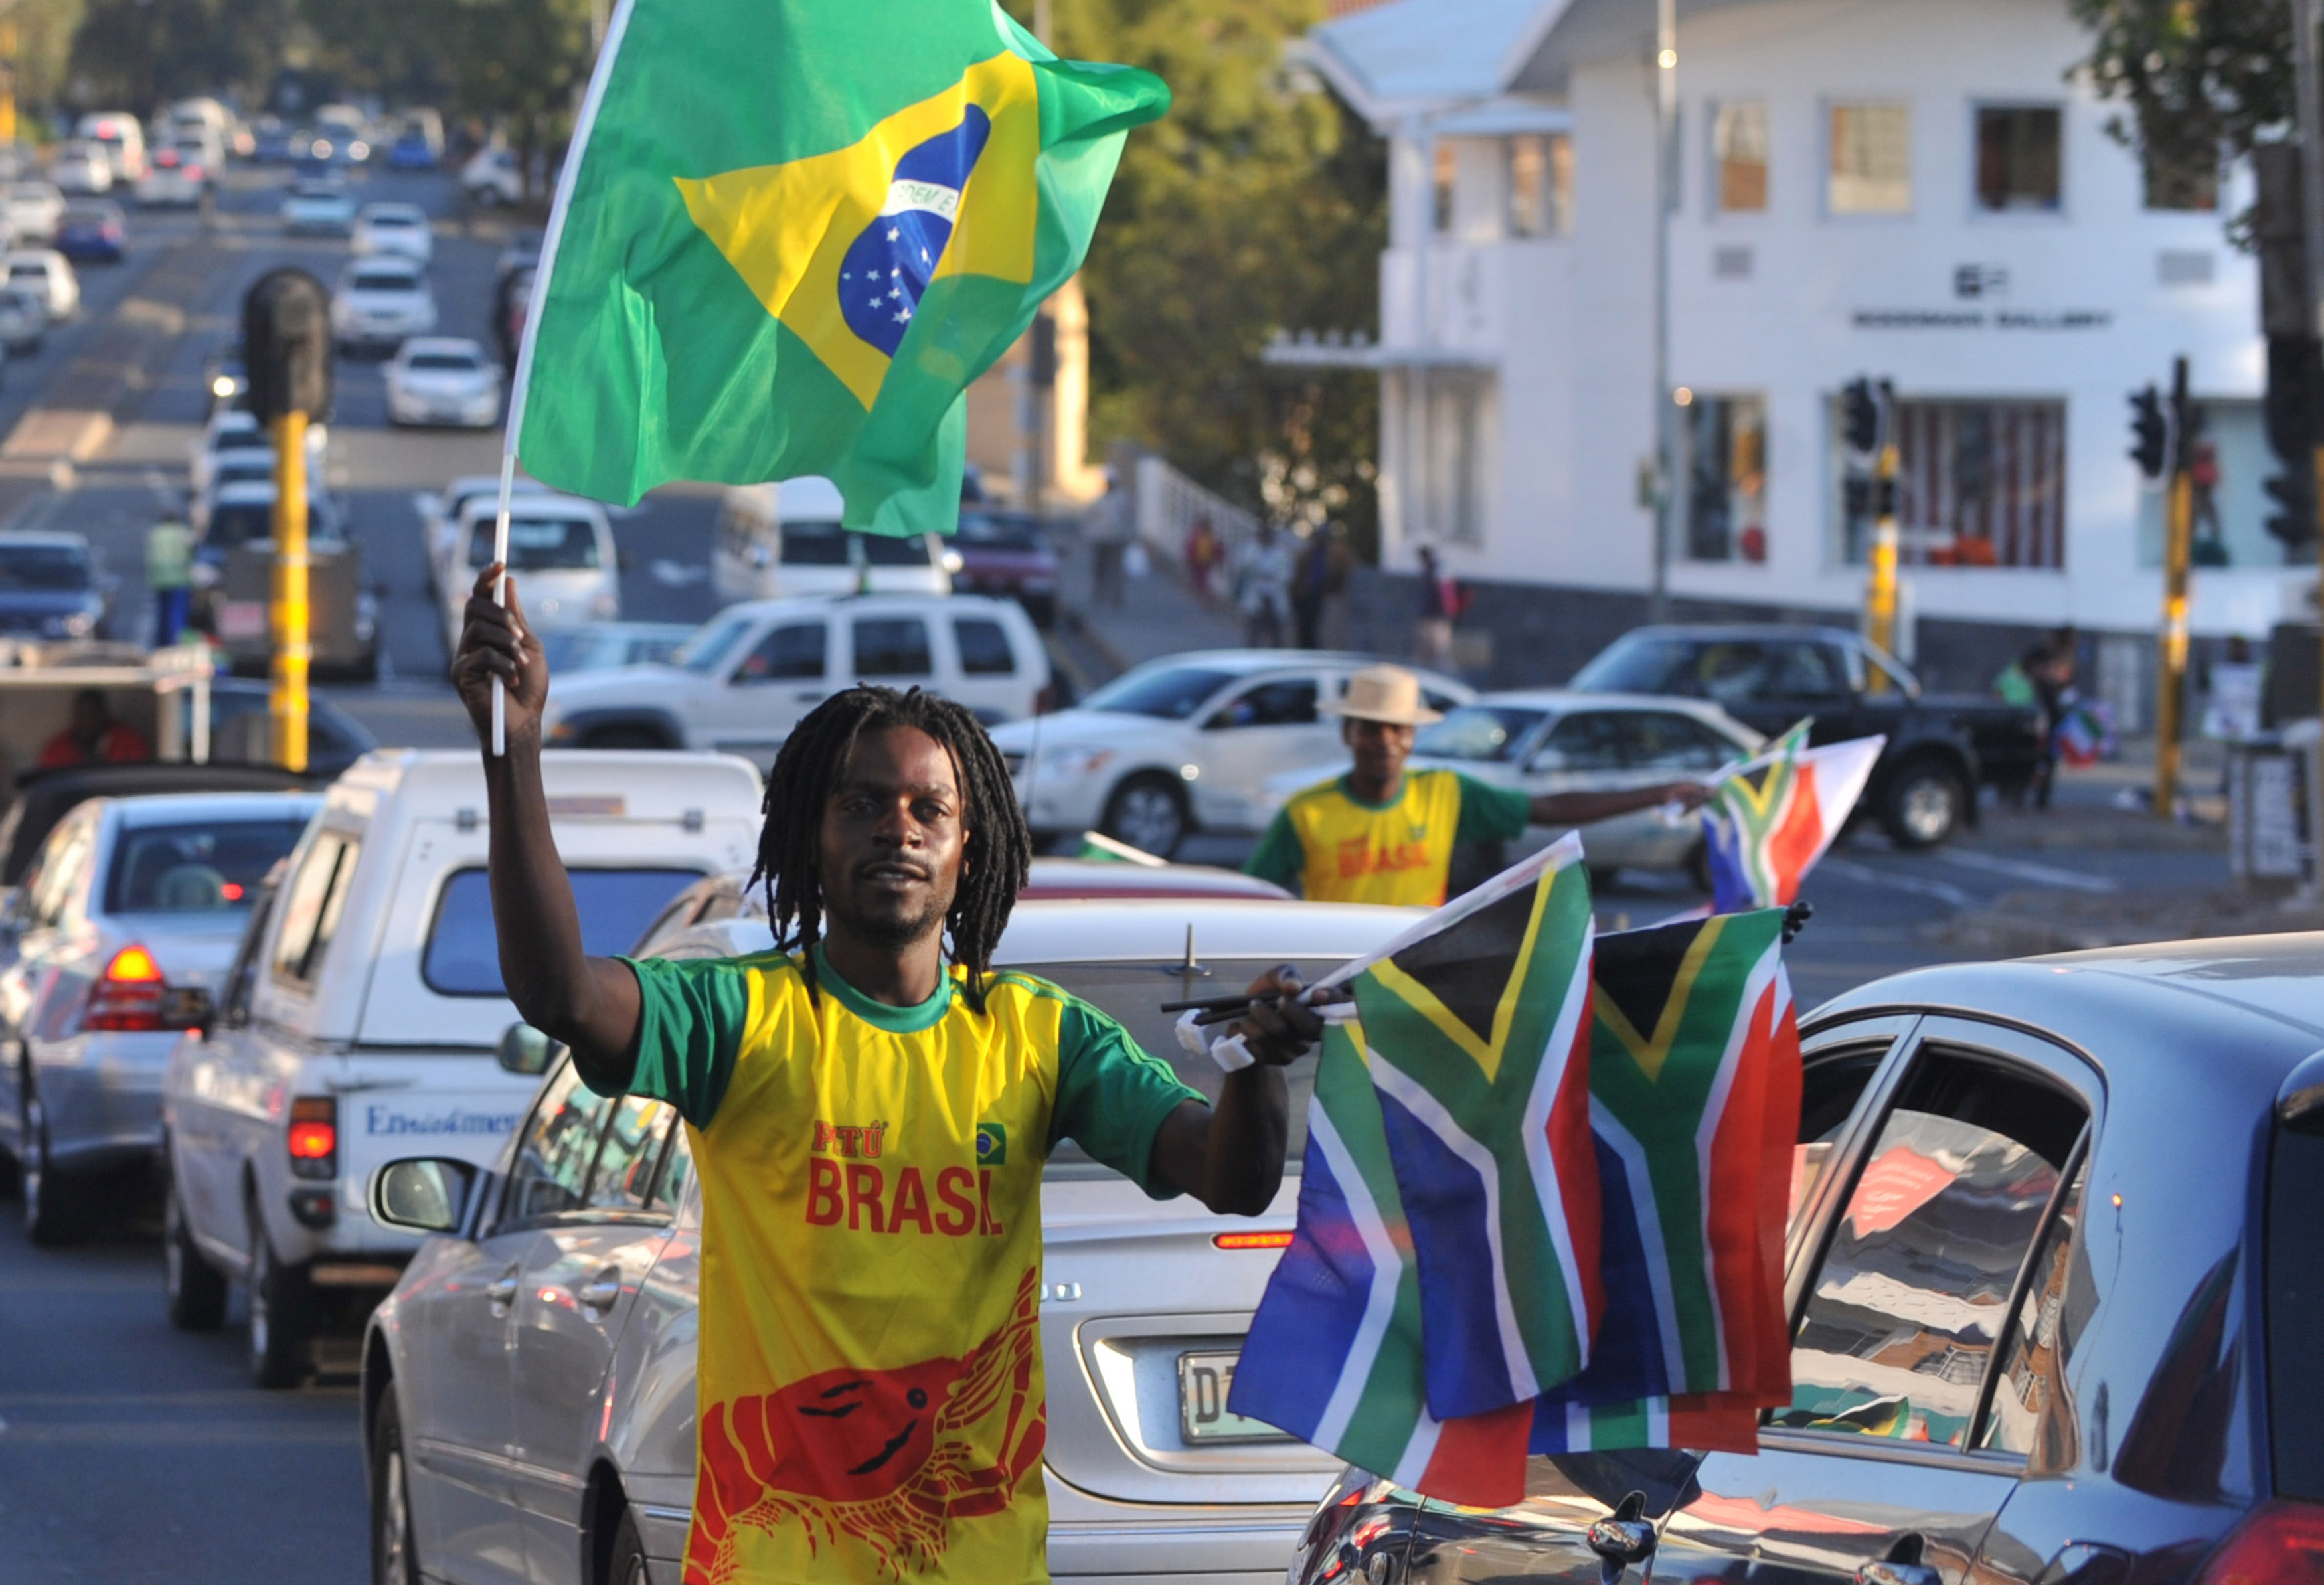 Street_vendors_selling_flags_in_Johannesburg_during_World_Cup_2010-06-18_2